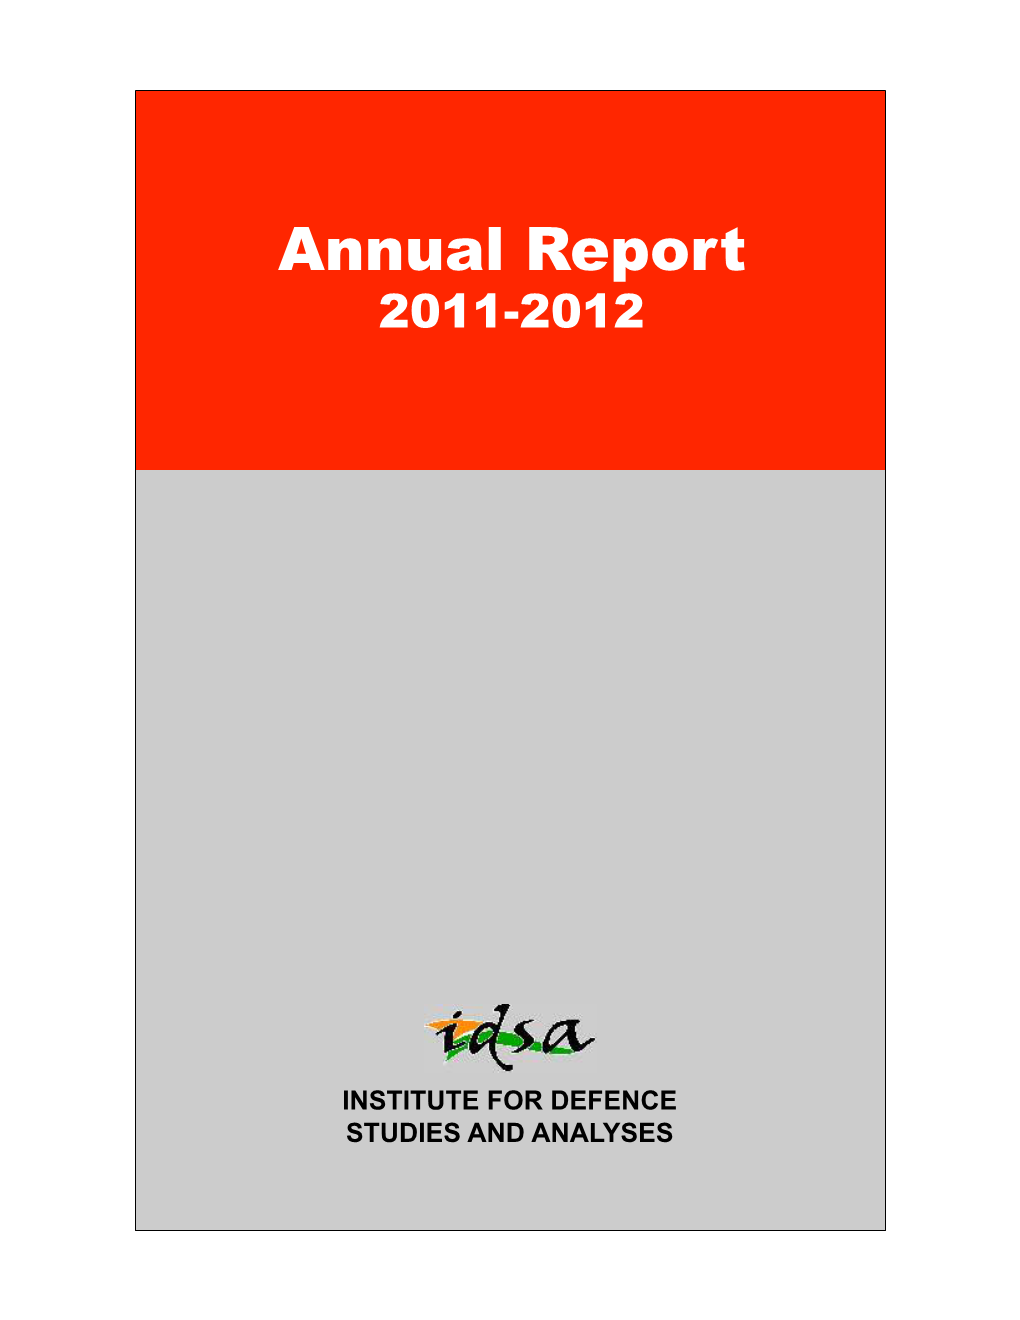 ANNUAL REPORT 2011-2012 Final.Cdr